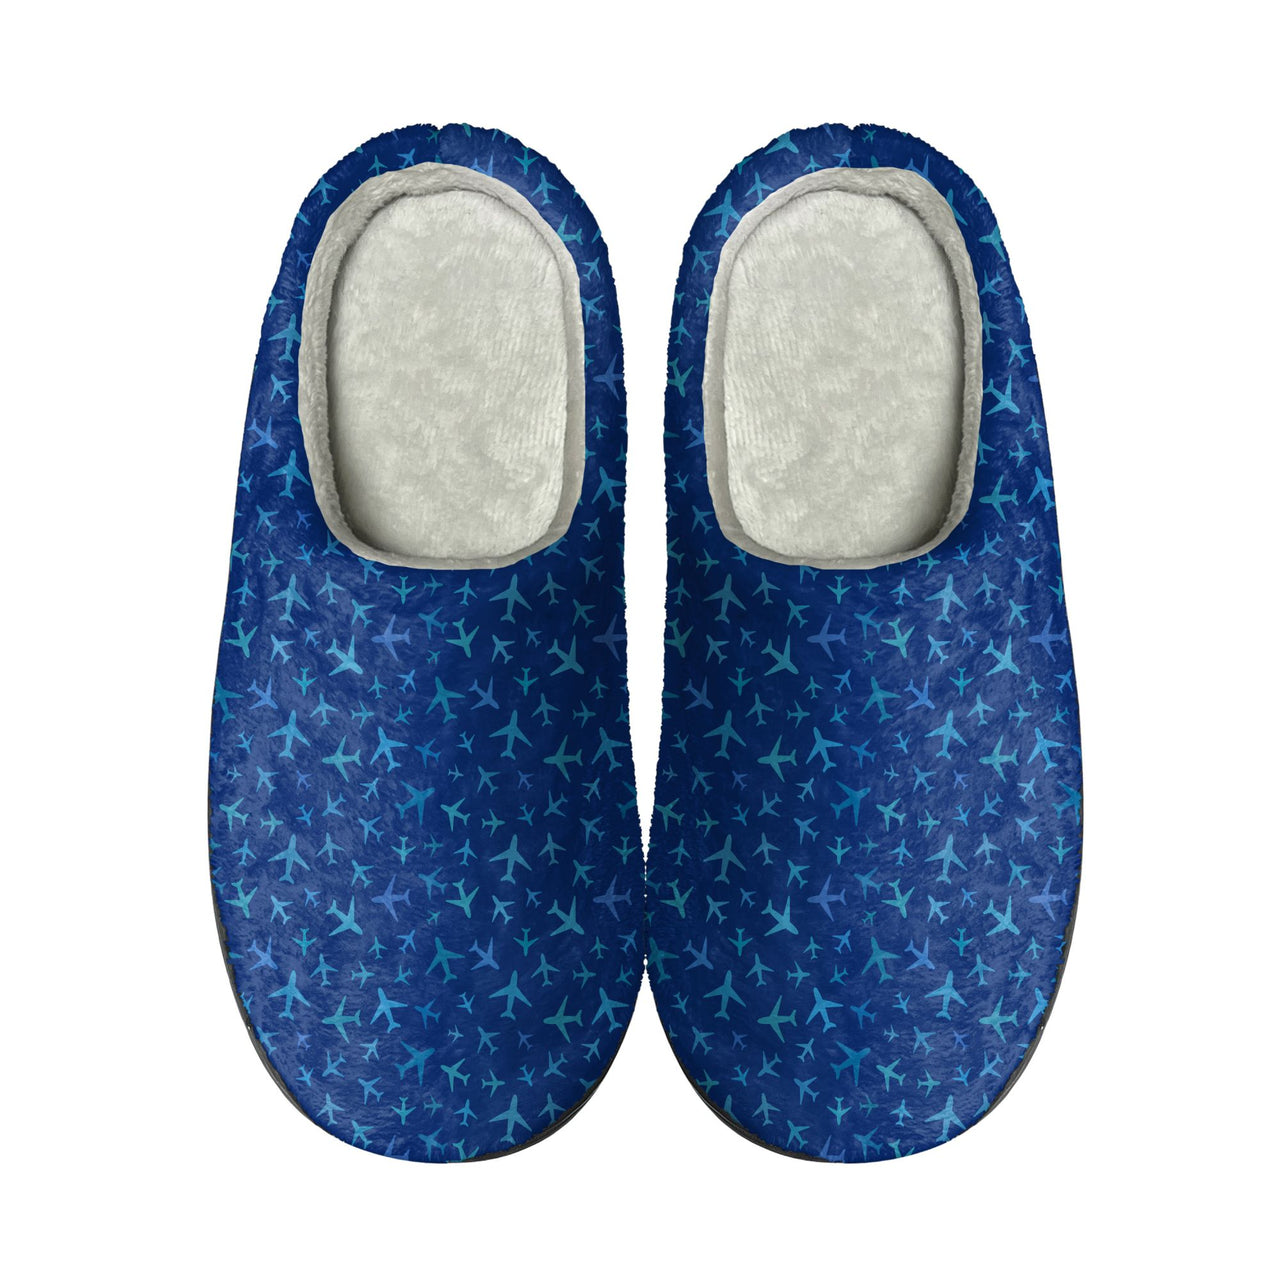 Many Airplanes Blue Designed Cotton Slippers